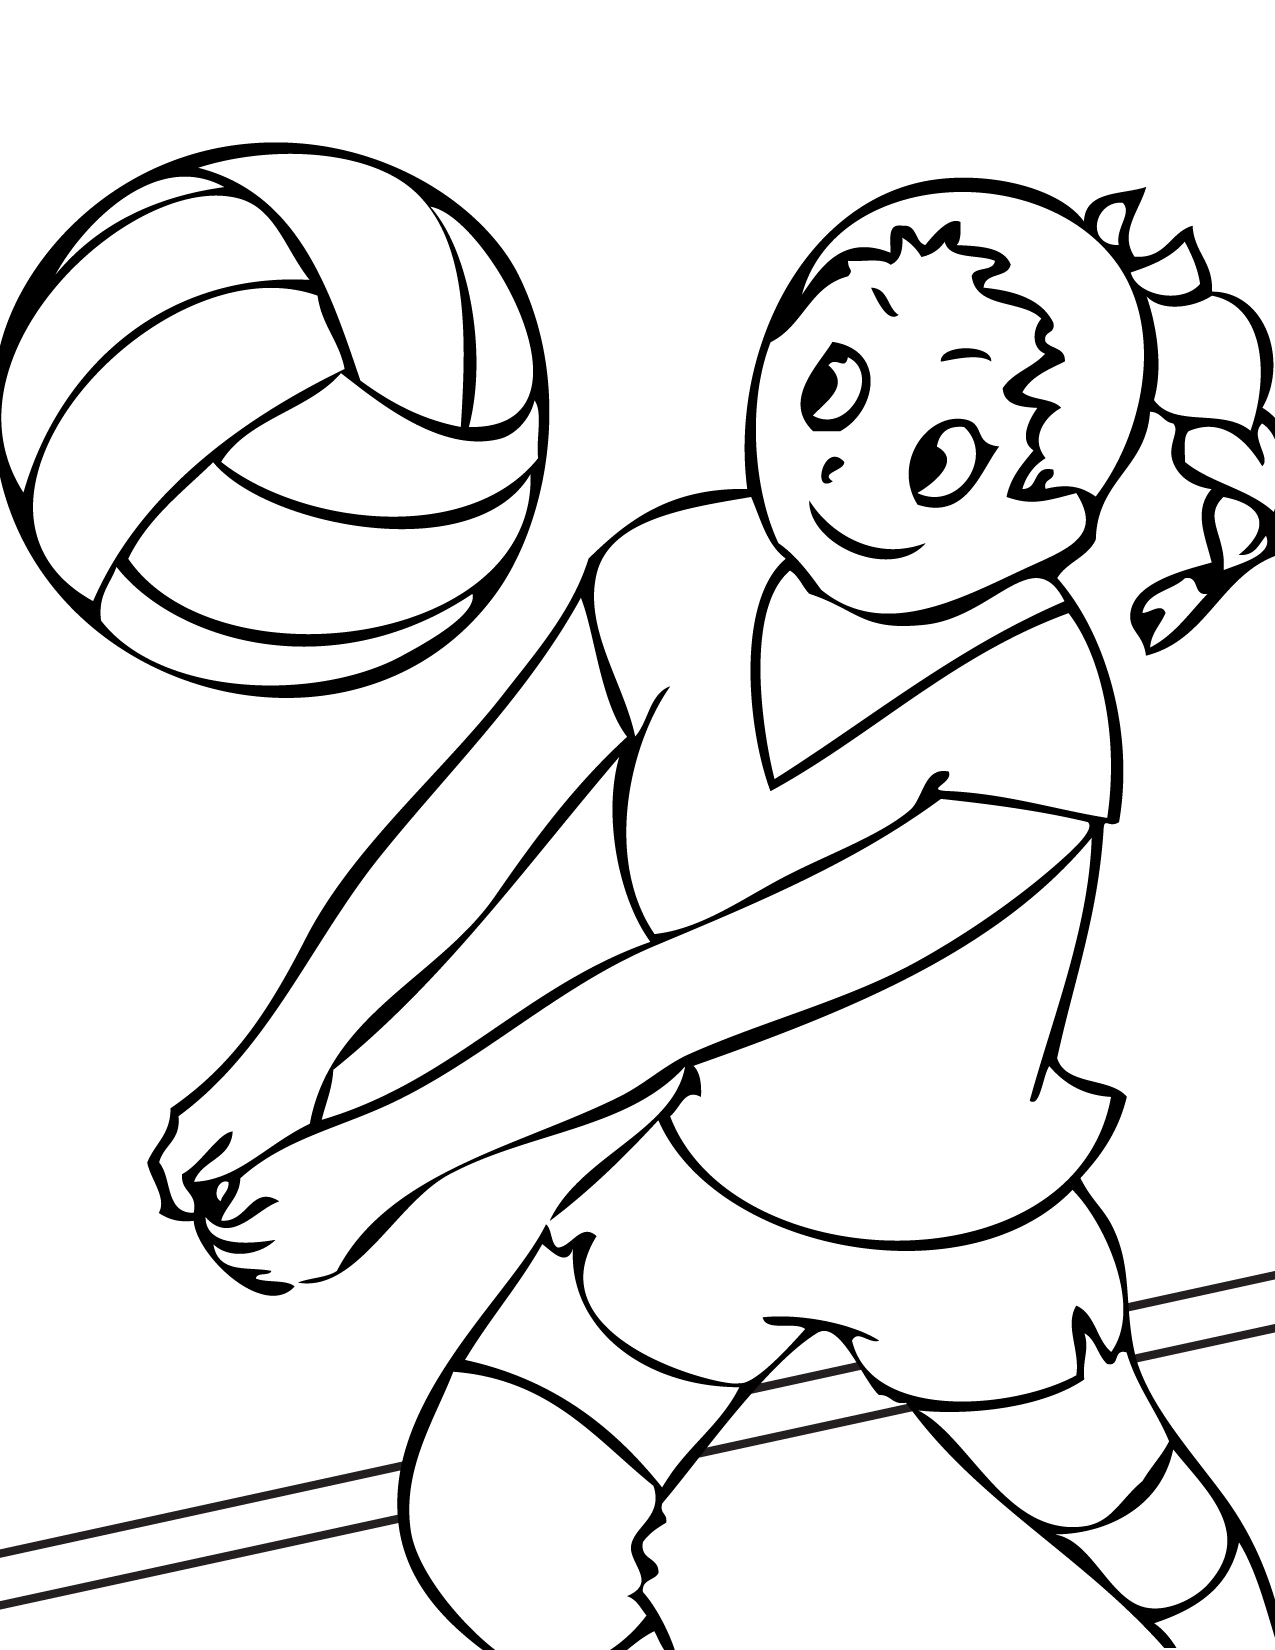  Training coloring pages | training Volleyball